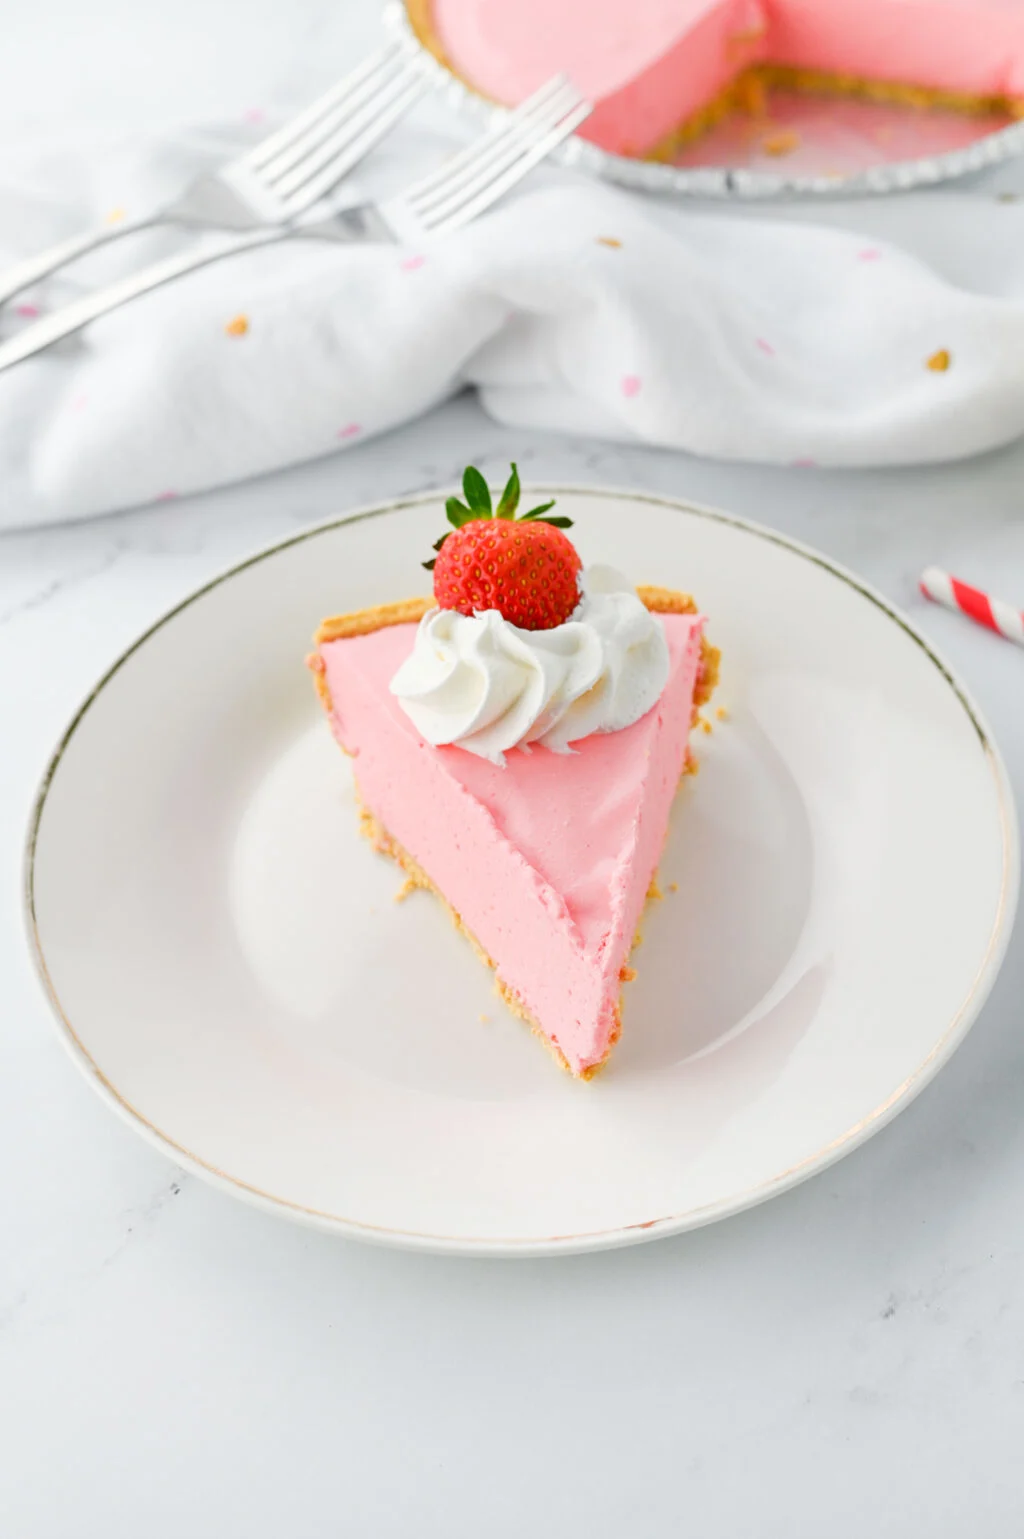 slice of strawberry jello pie with whipped cream and strawberry on top